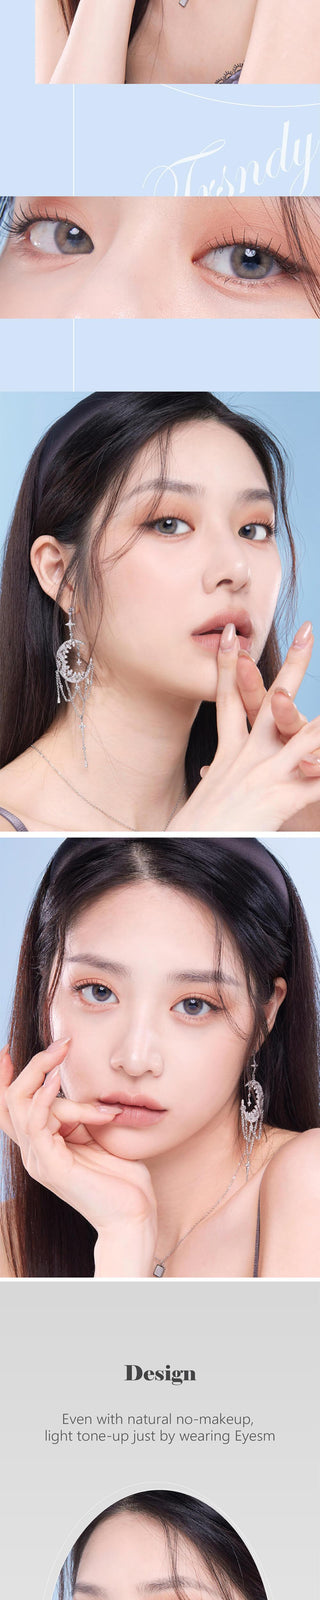 Several views of a Korean model with the Eyesm Marine Grey color contact lenses. An enlargement of a model's eyes with the prescription colored contacts, demonstrating the subtle yet striking change on dark eyes.